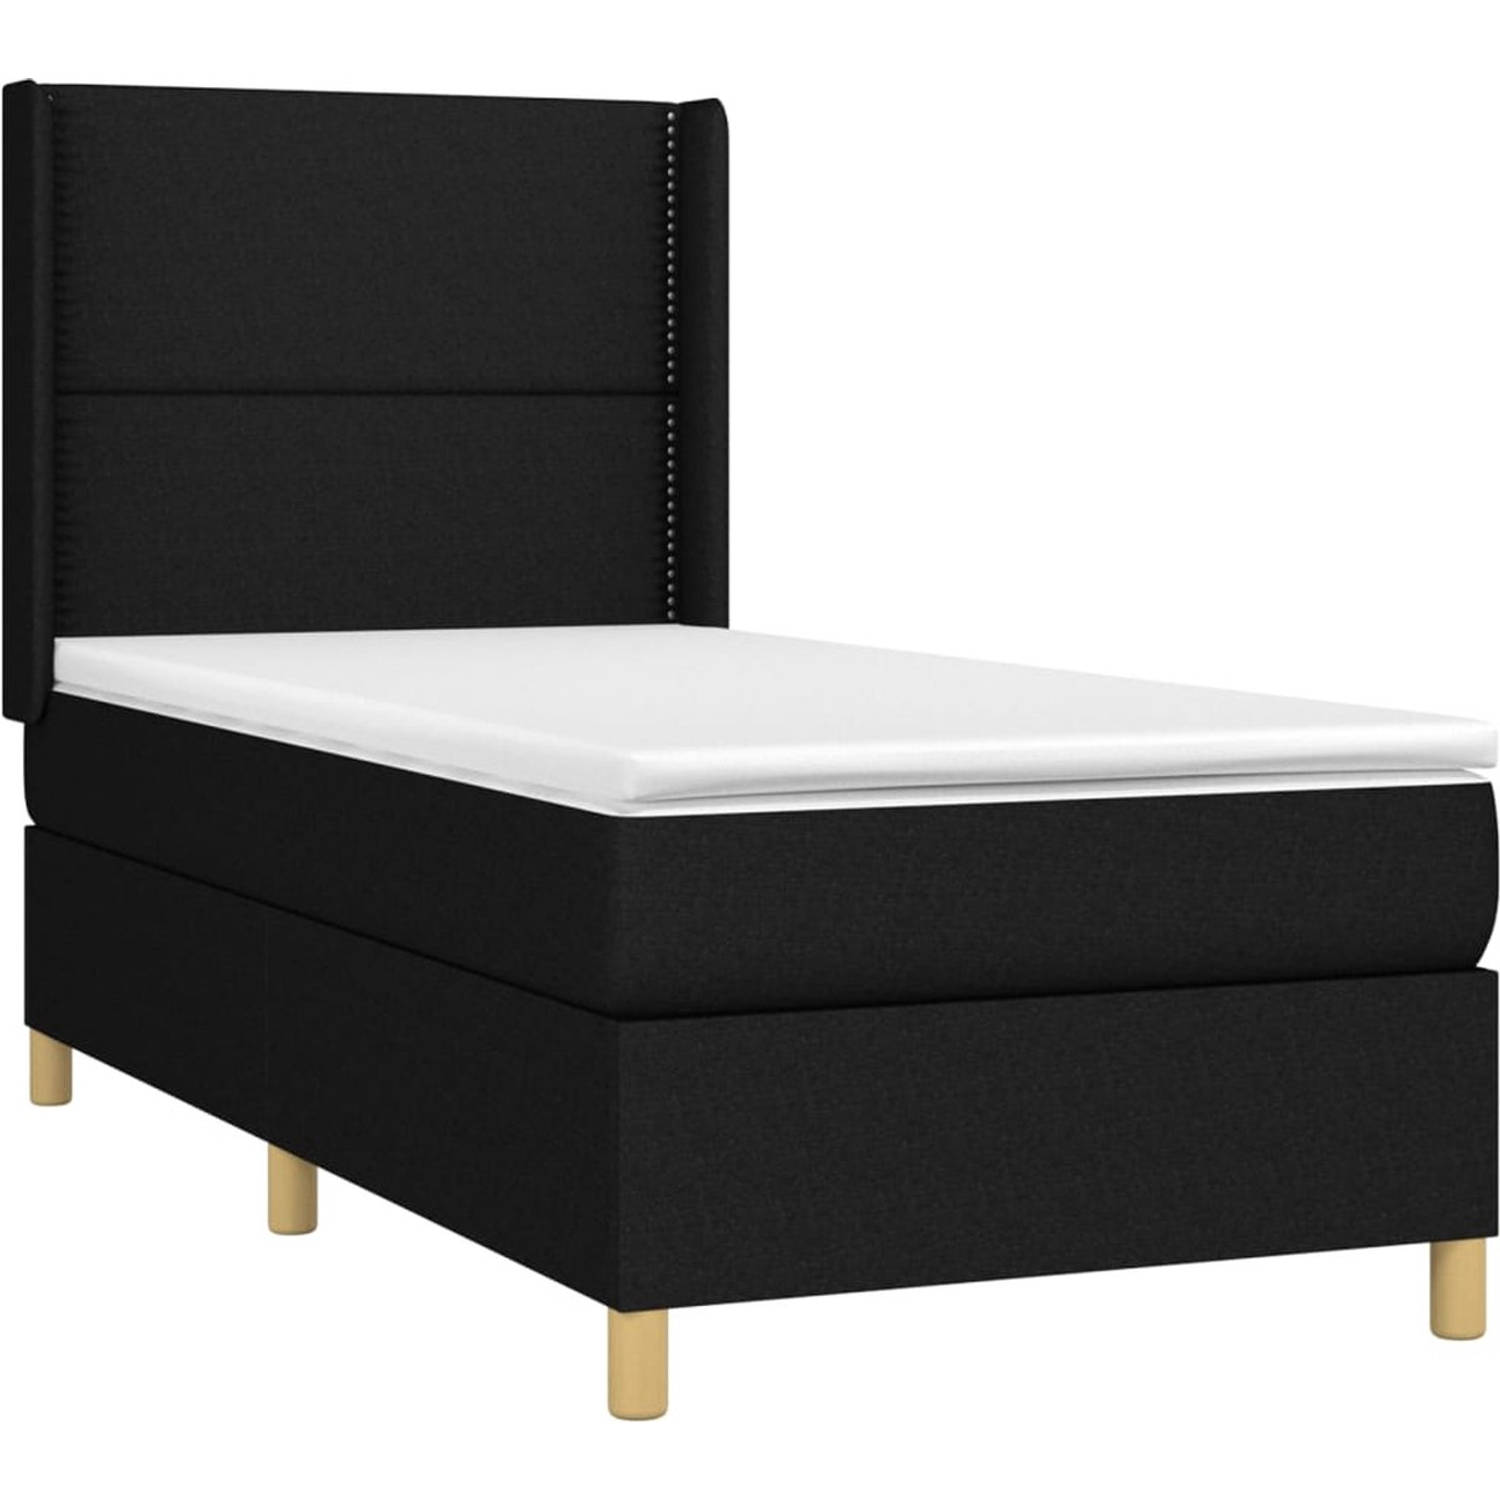 The Living Store Bed - 1 - Boxspringbed 100x200 - Zwart